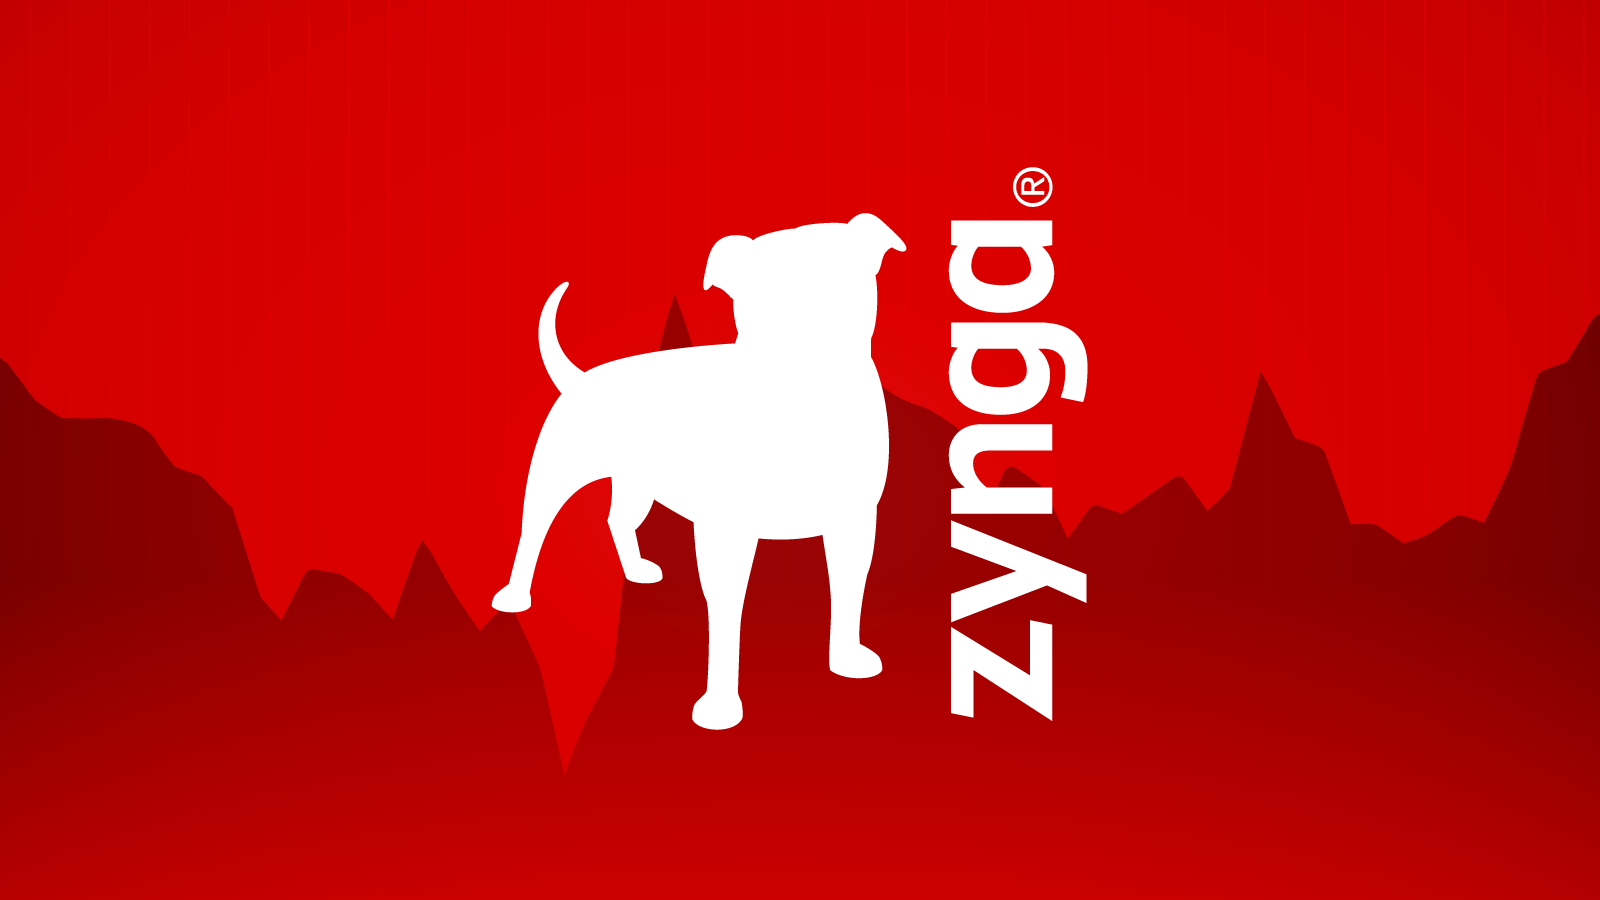 Zynga and Forte announce partnership to develop blockchain games